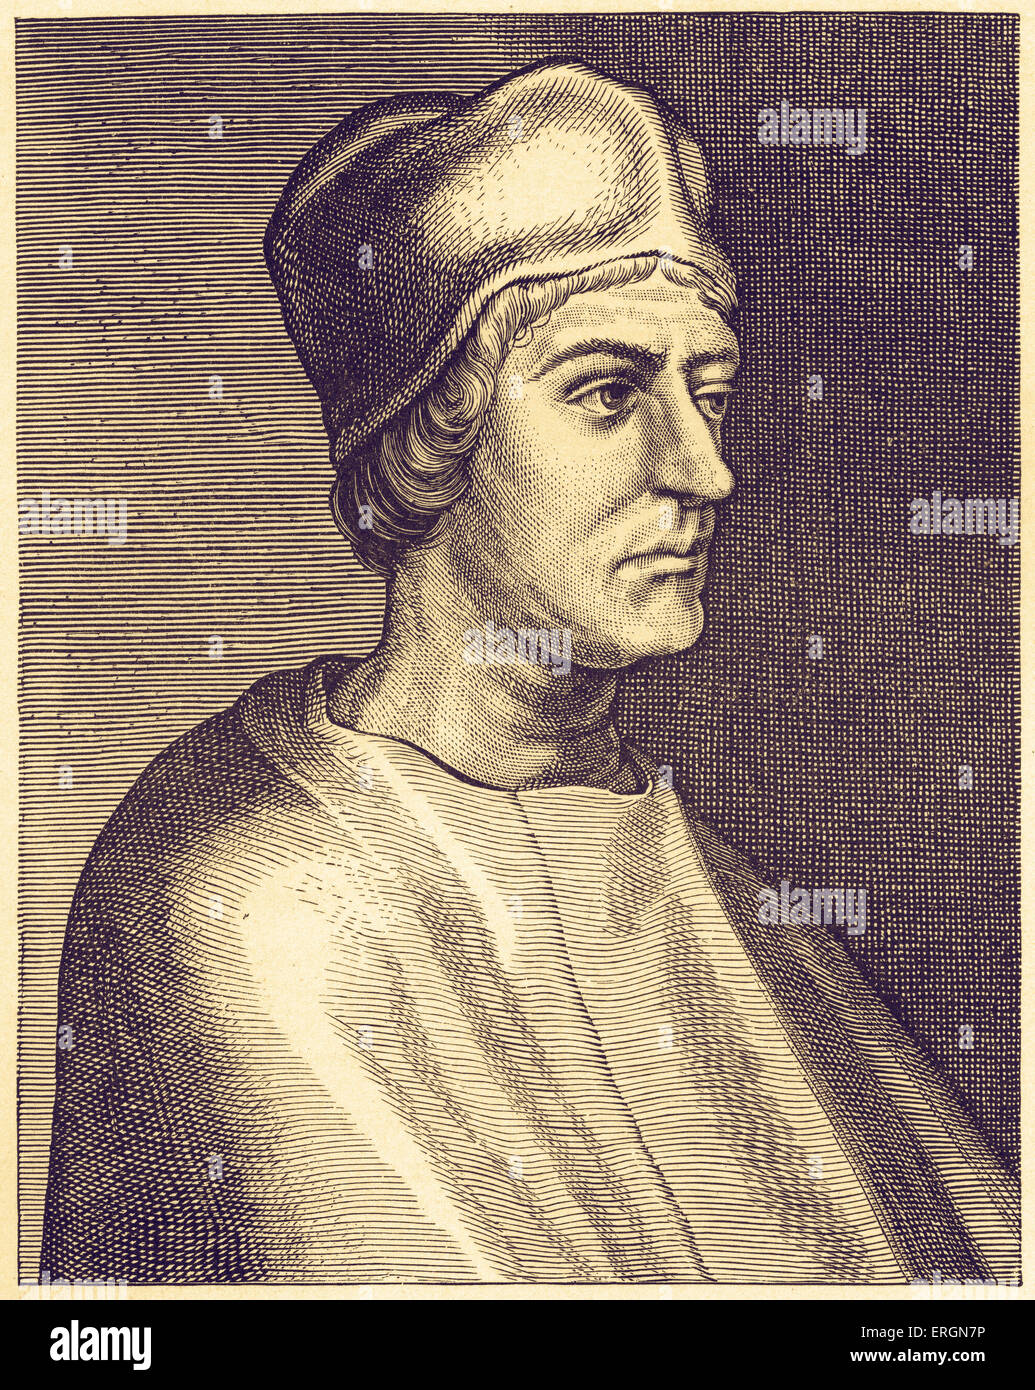 John Colet (1467-1519) was an English theologian and Dean of St. Paul's Cathedral. Stock Photo